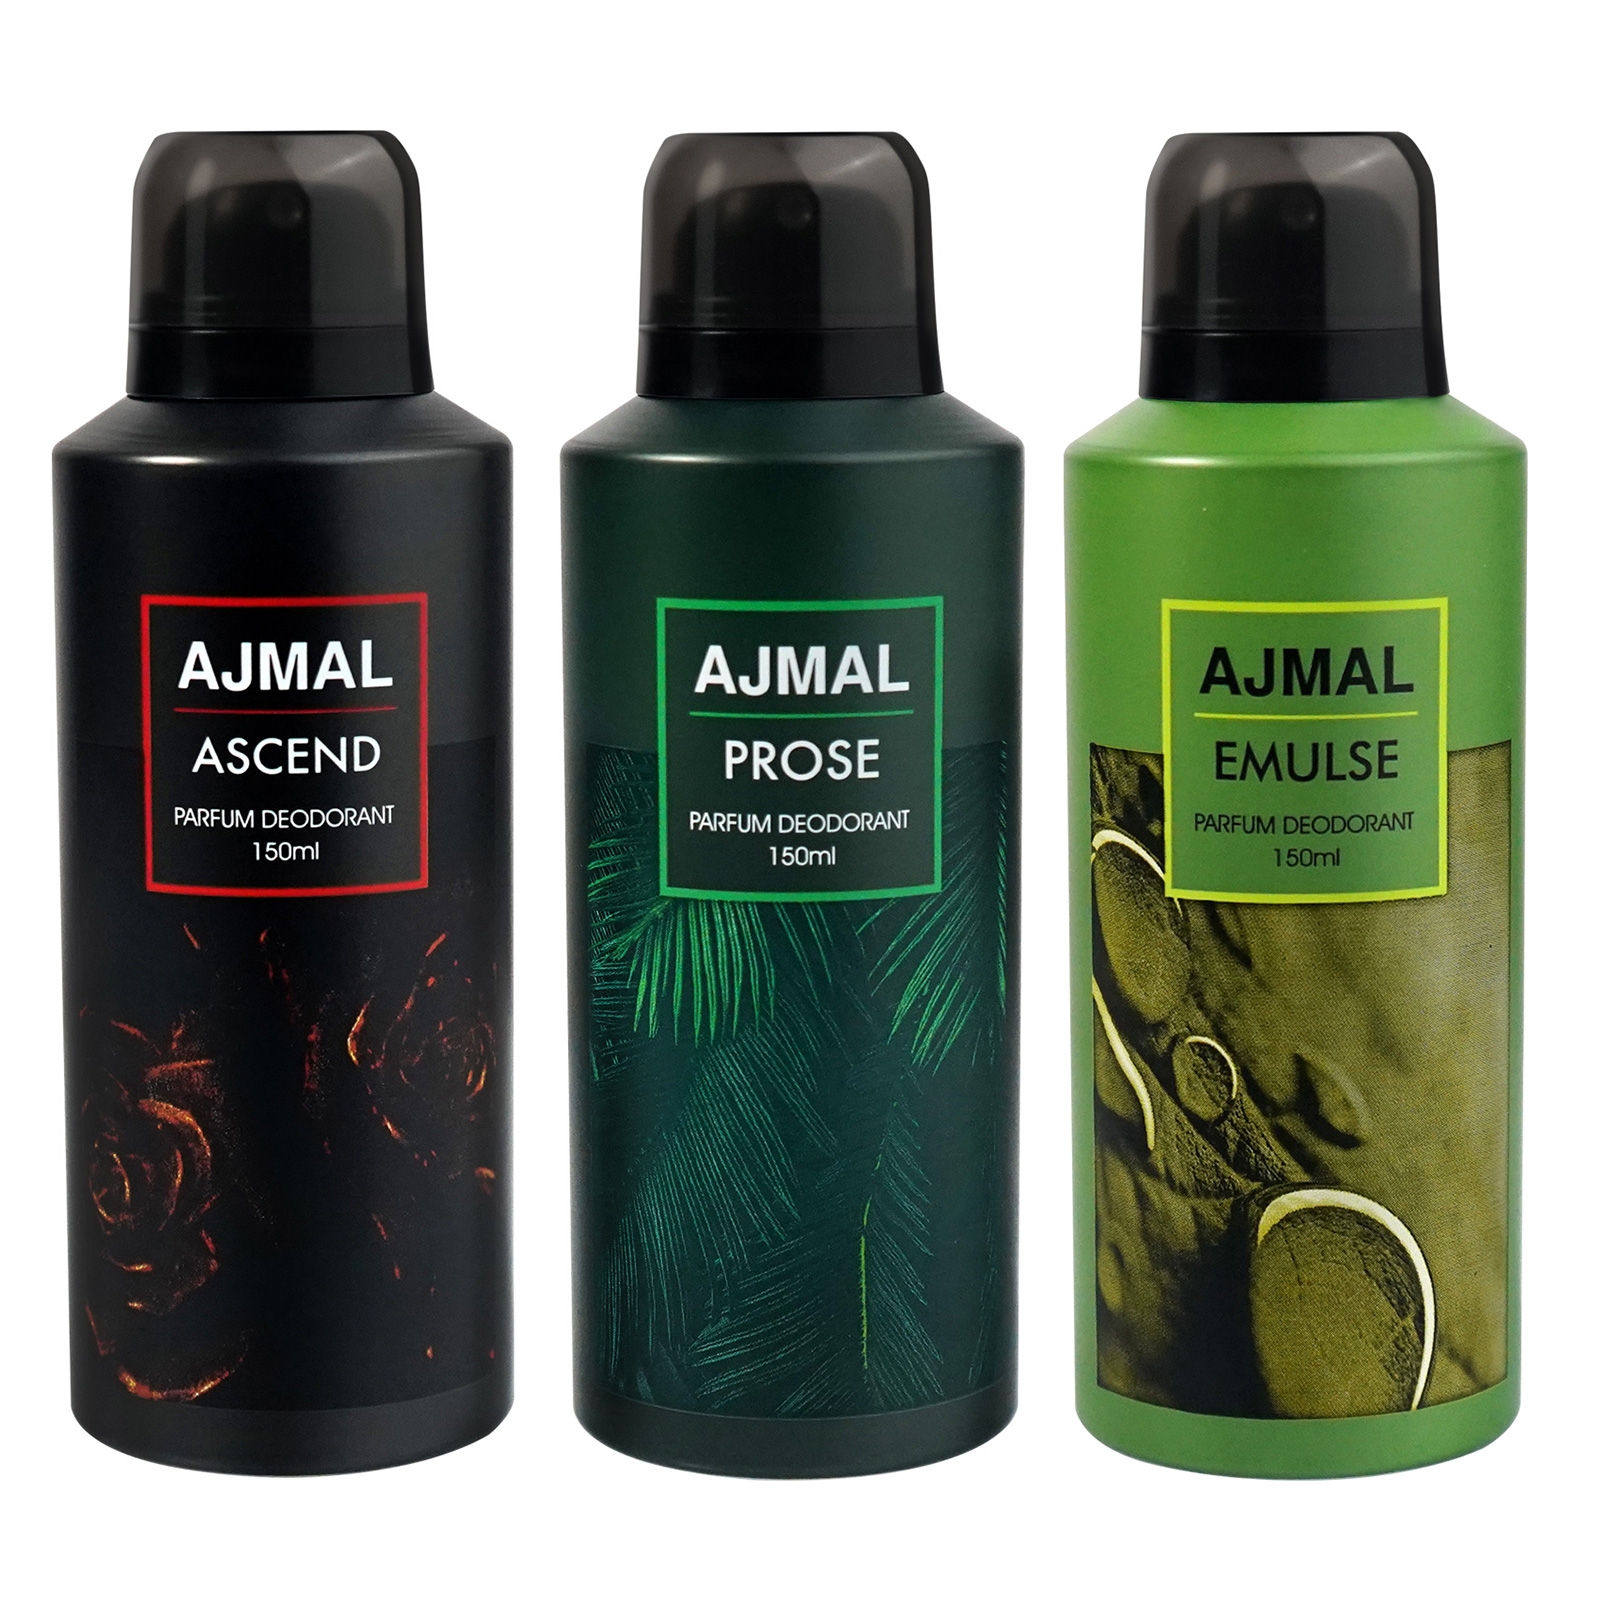 Ajmal Ascend, Prose and Emulse Deodorant Perfume 150ML Each Long Lasting Spray Party Wear Gift For Men and Women Online Exclusive